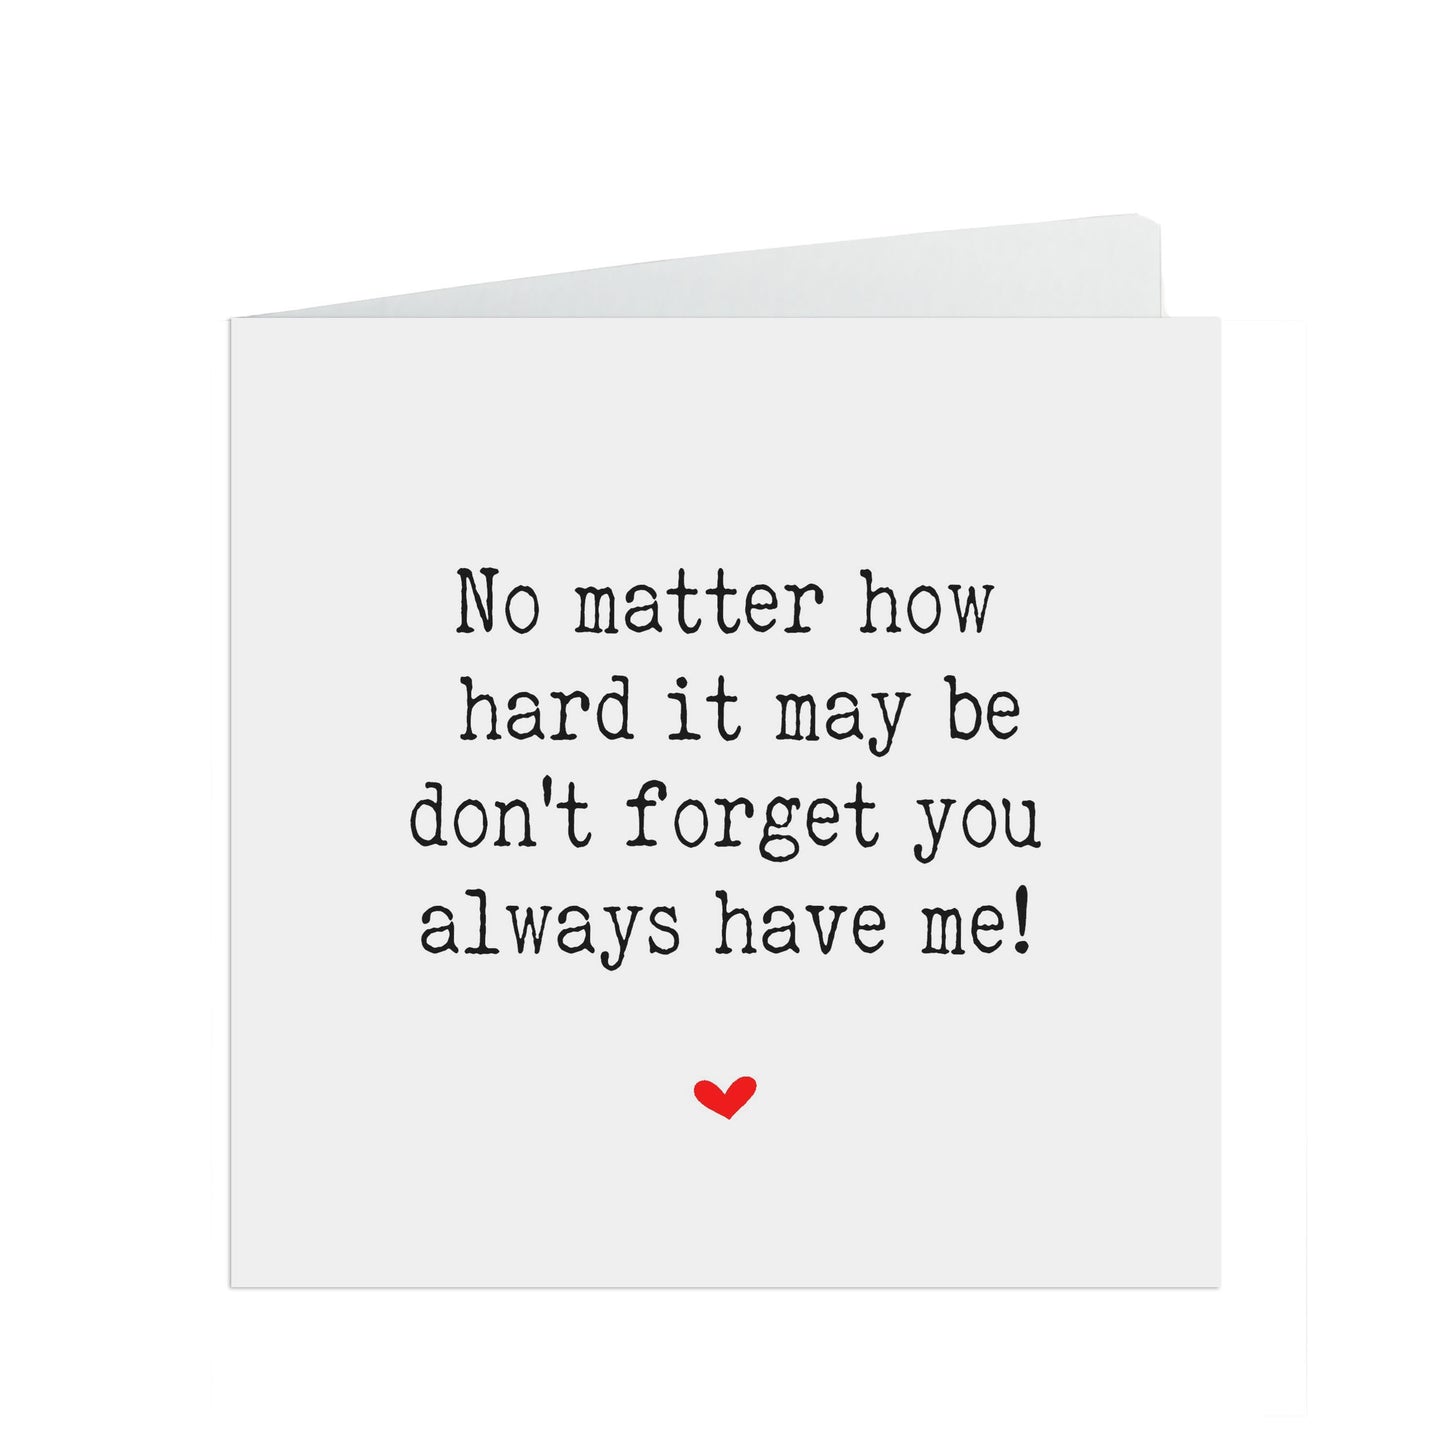 No Matter How Hard It May Be, Don't Forget You Always Have Me! Friend Support Or Encouragement Card